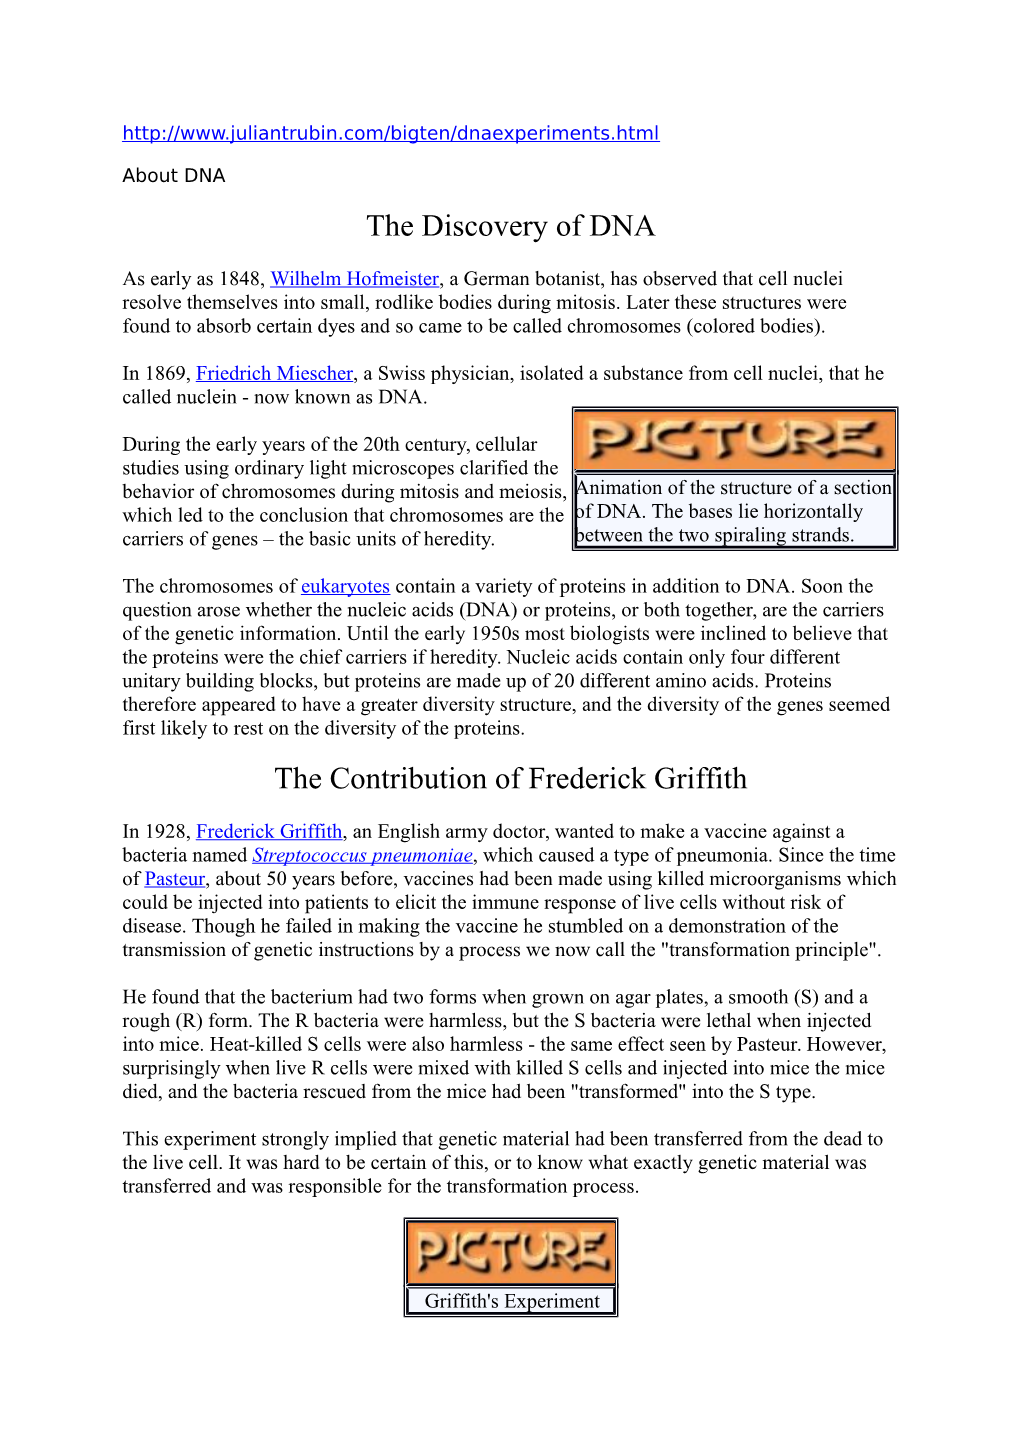 The Discovery of DNA the Contribution of Frederick Griffith